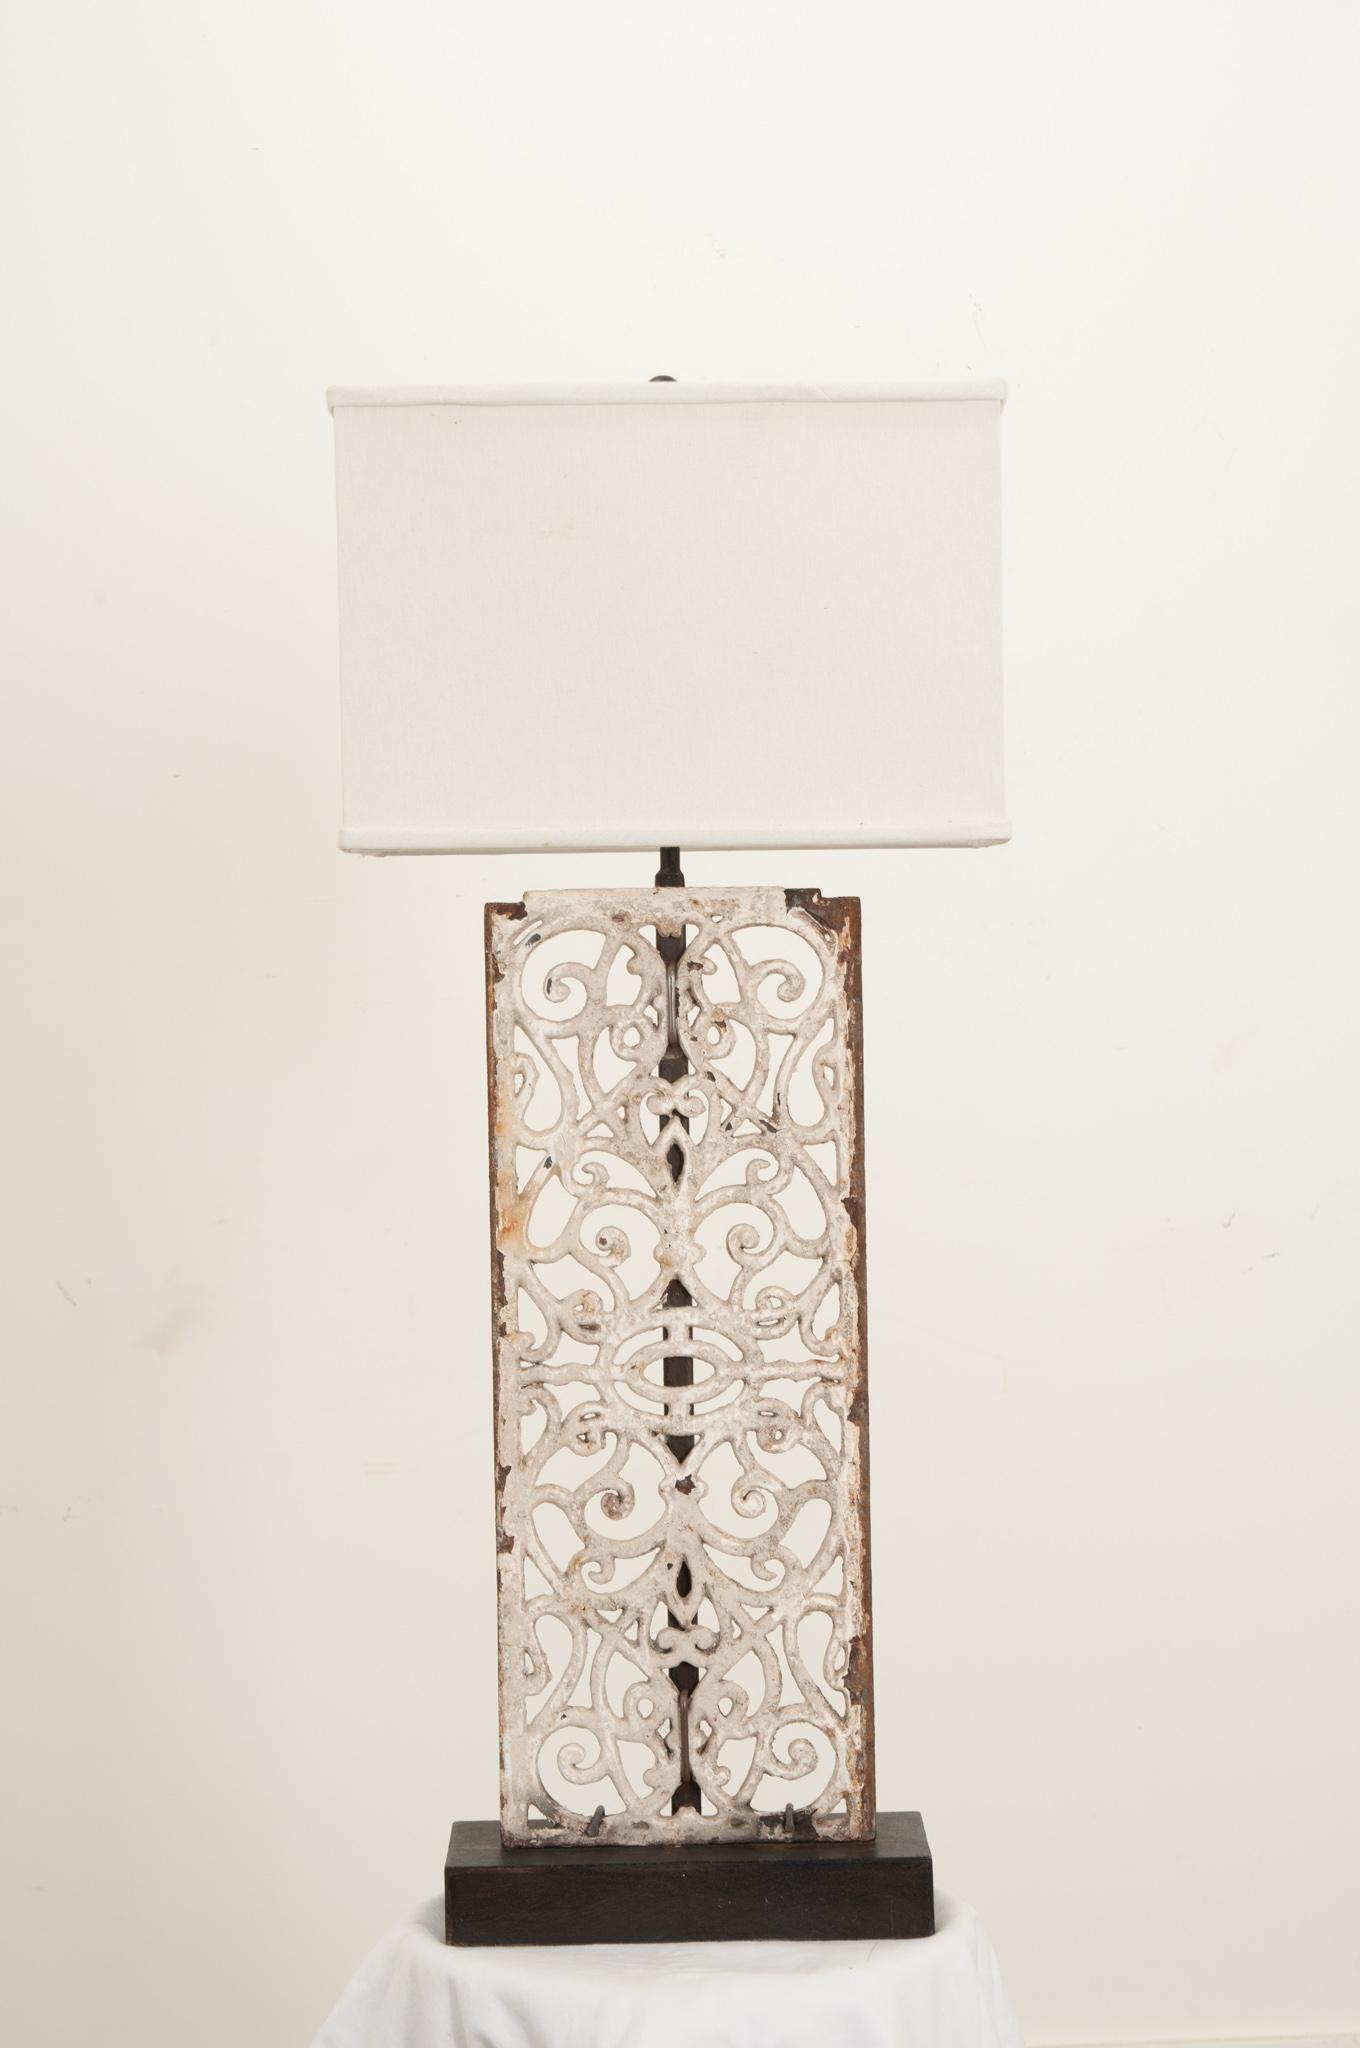 This newly made table lamp from a vintage painted iron panel is a great way to add tons of character to your interior. Painted white and perfectly patinated, the panel is securely fixed to the black metal base and center support. The rectangular